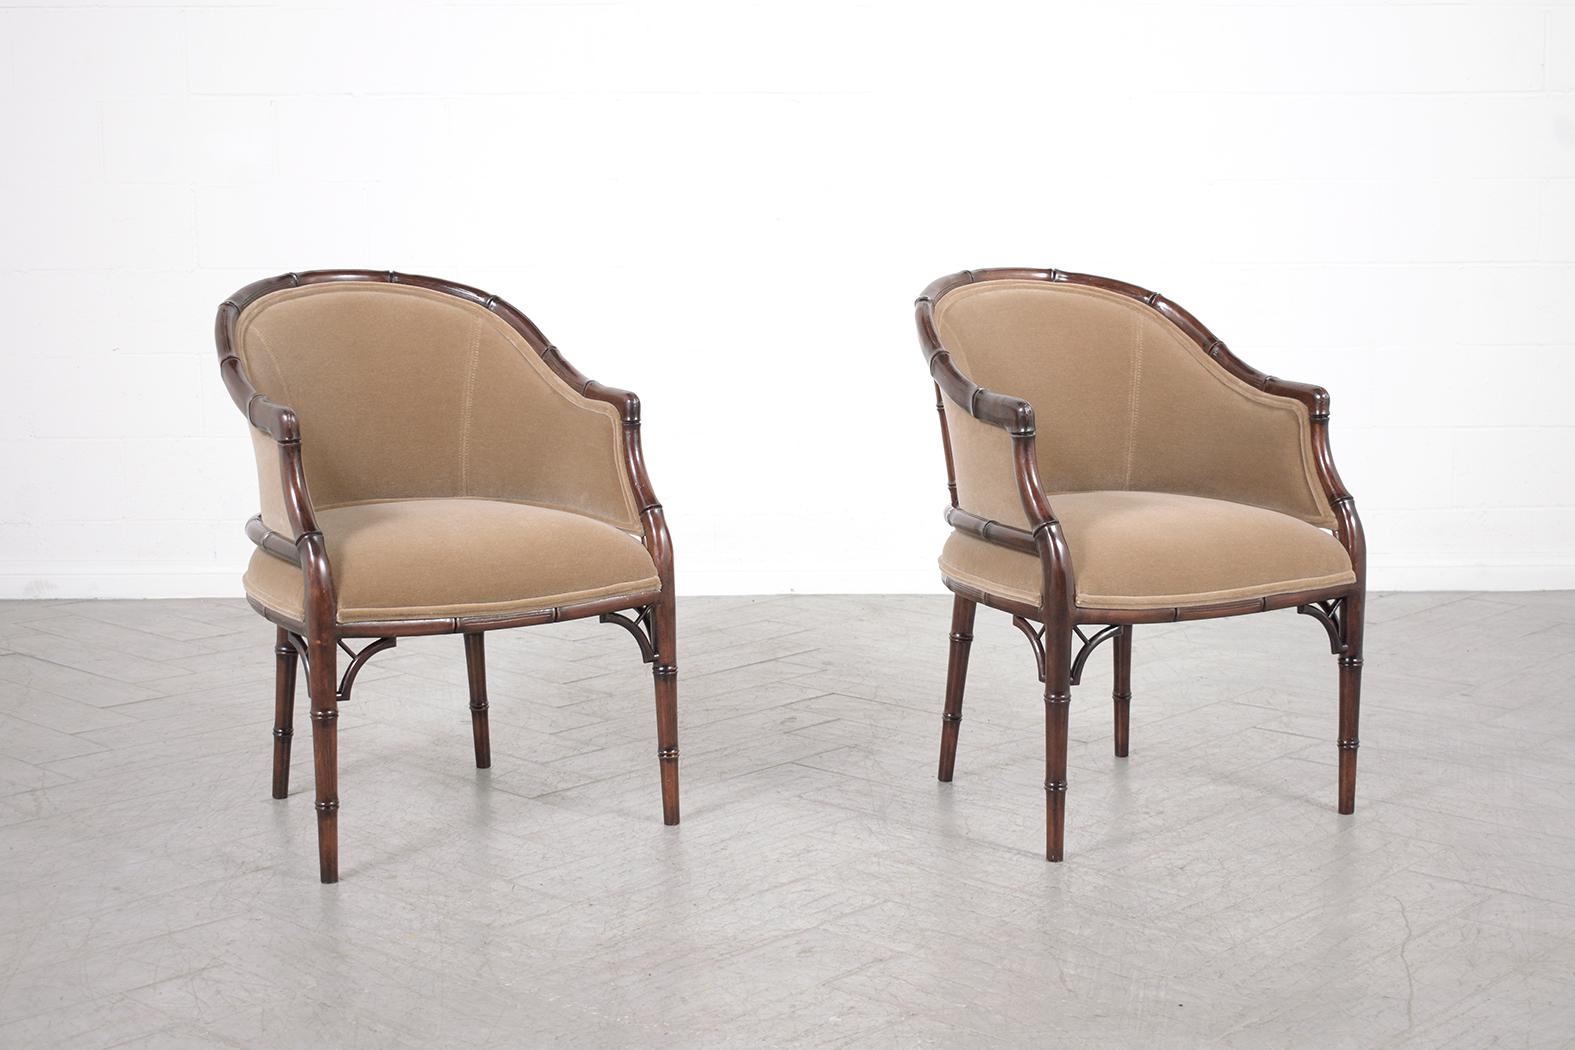 Mid-20th Century Elegant Vintage Hollywood Regency Armchairs: Bamboo-Carved and Newly Refurbished For Sale